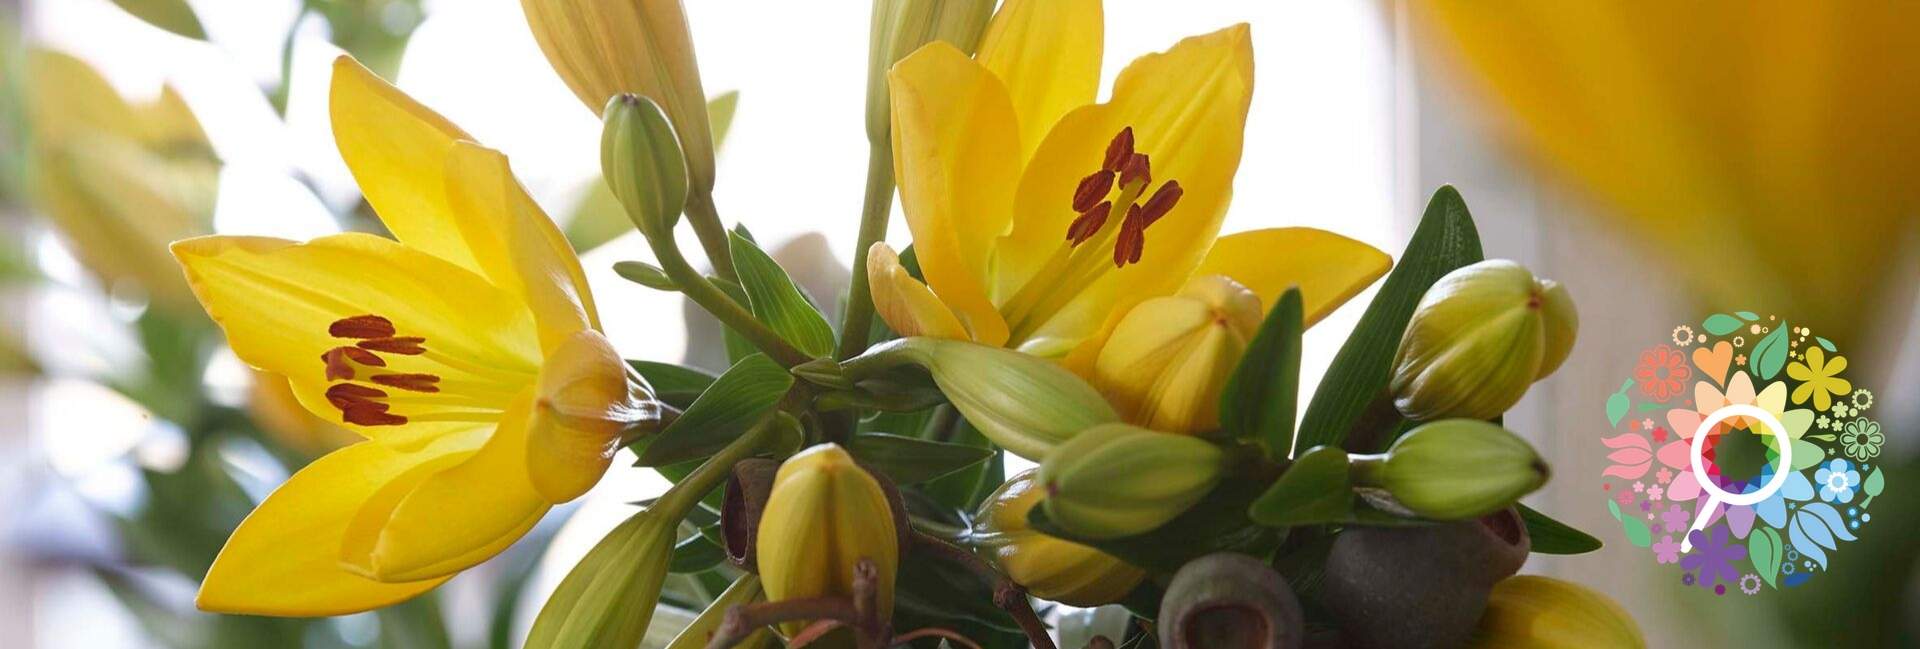 lily-aygo-time-lapse-header